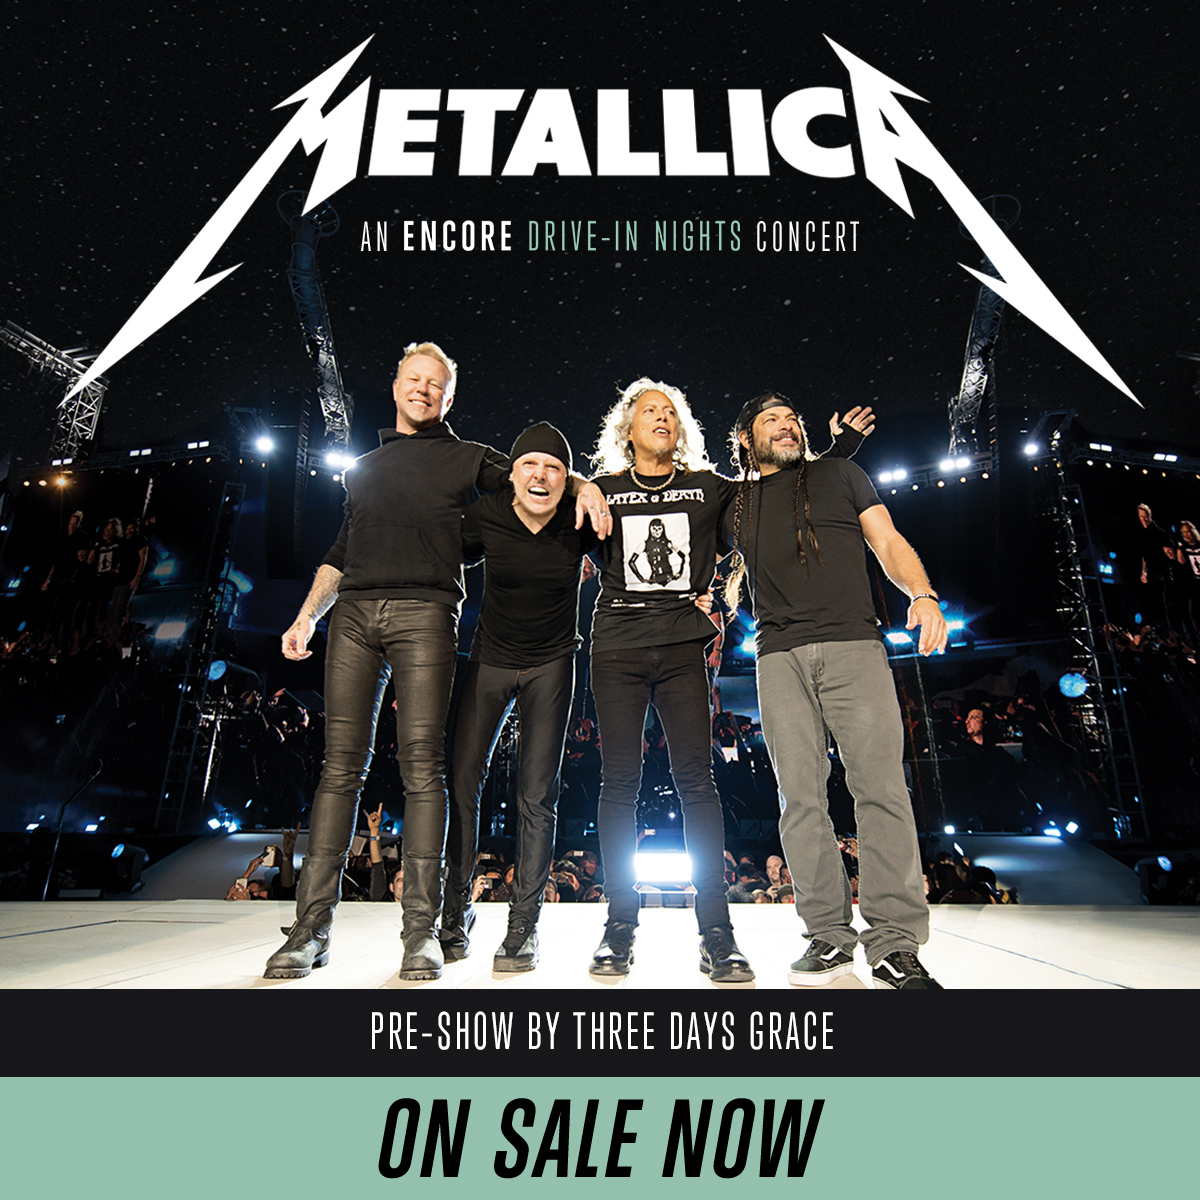 See Metallica, one night only, at drive-ins across North America